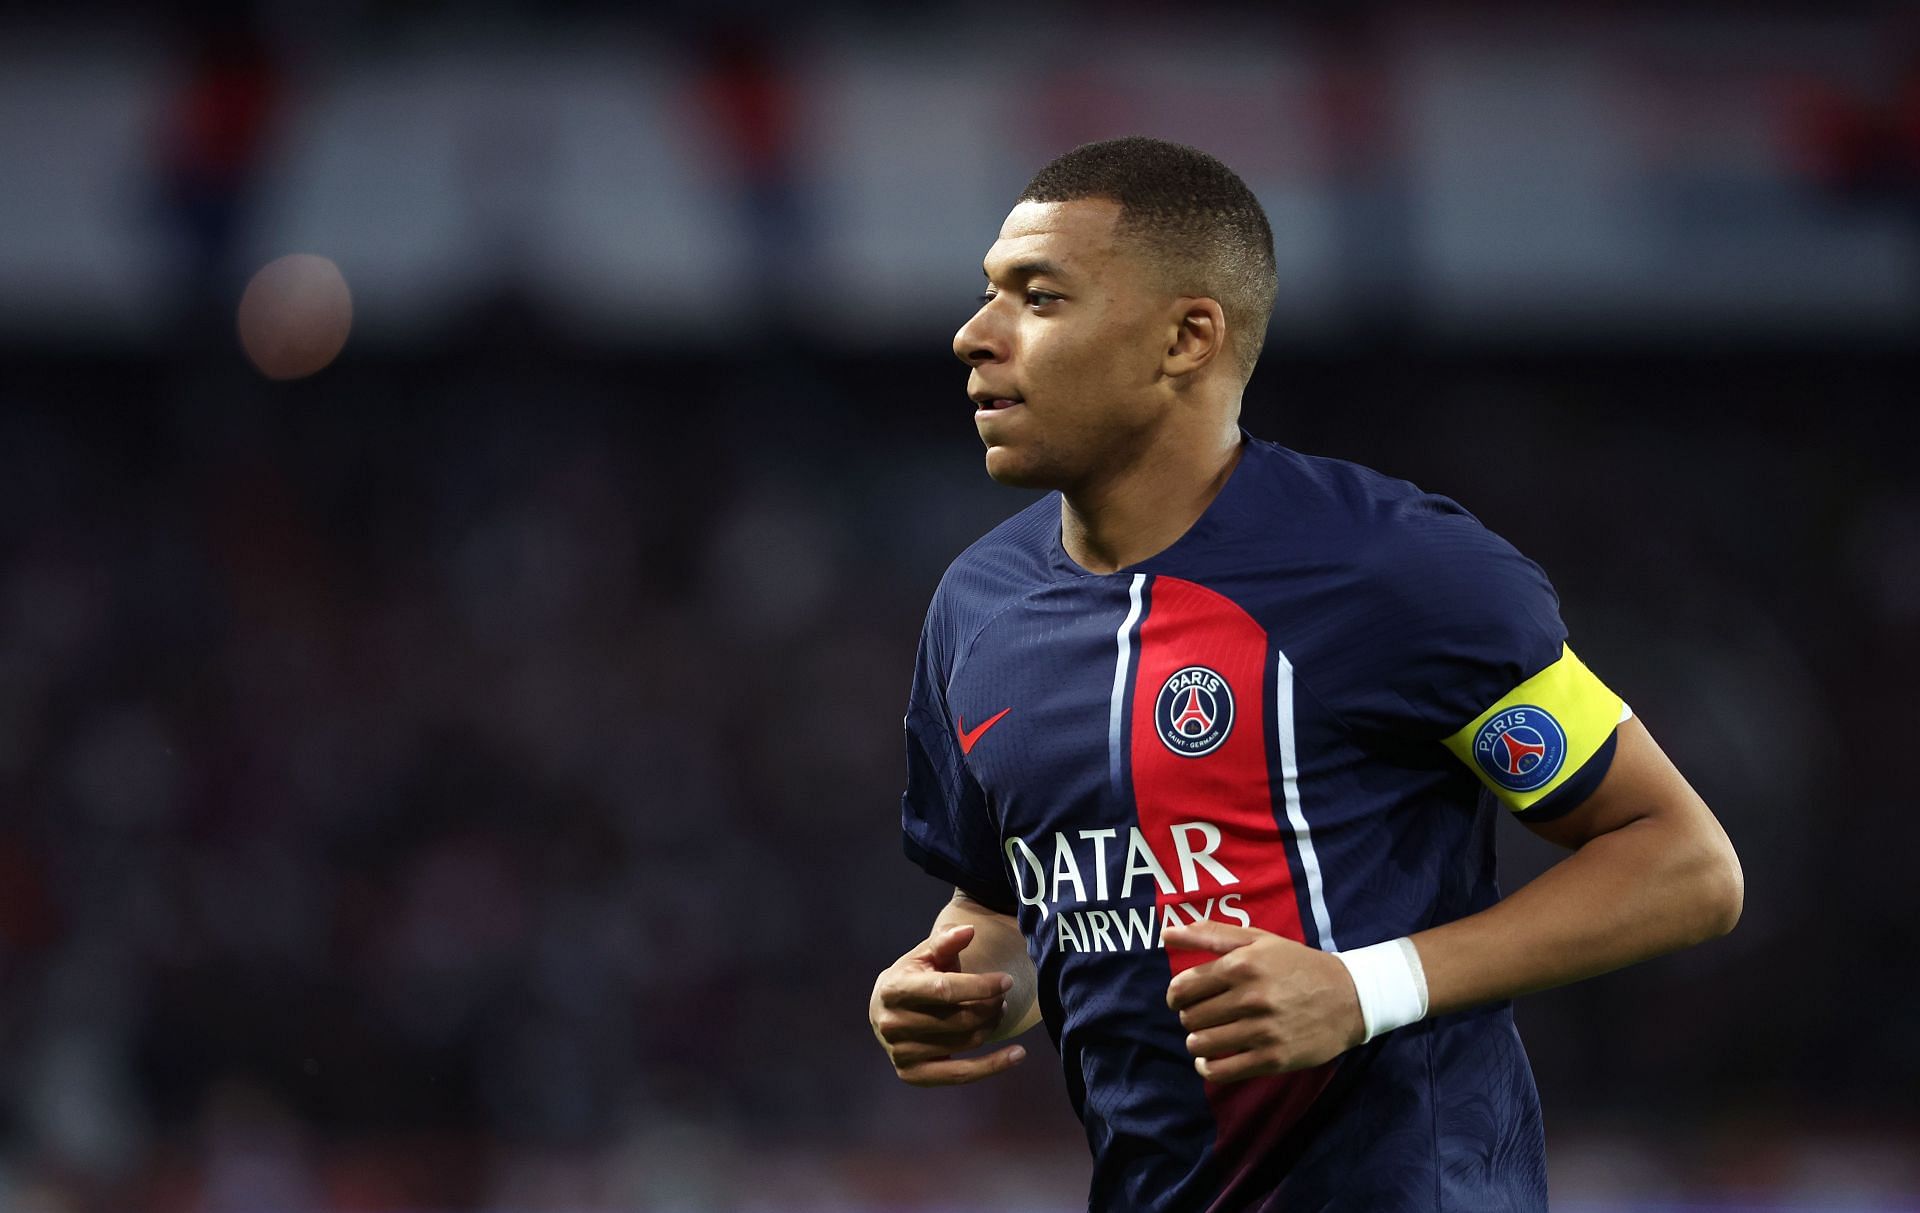 Kylian Mbappe was offered way more than Patrick Mahomes&#039; mega deal